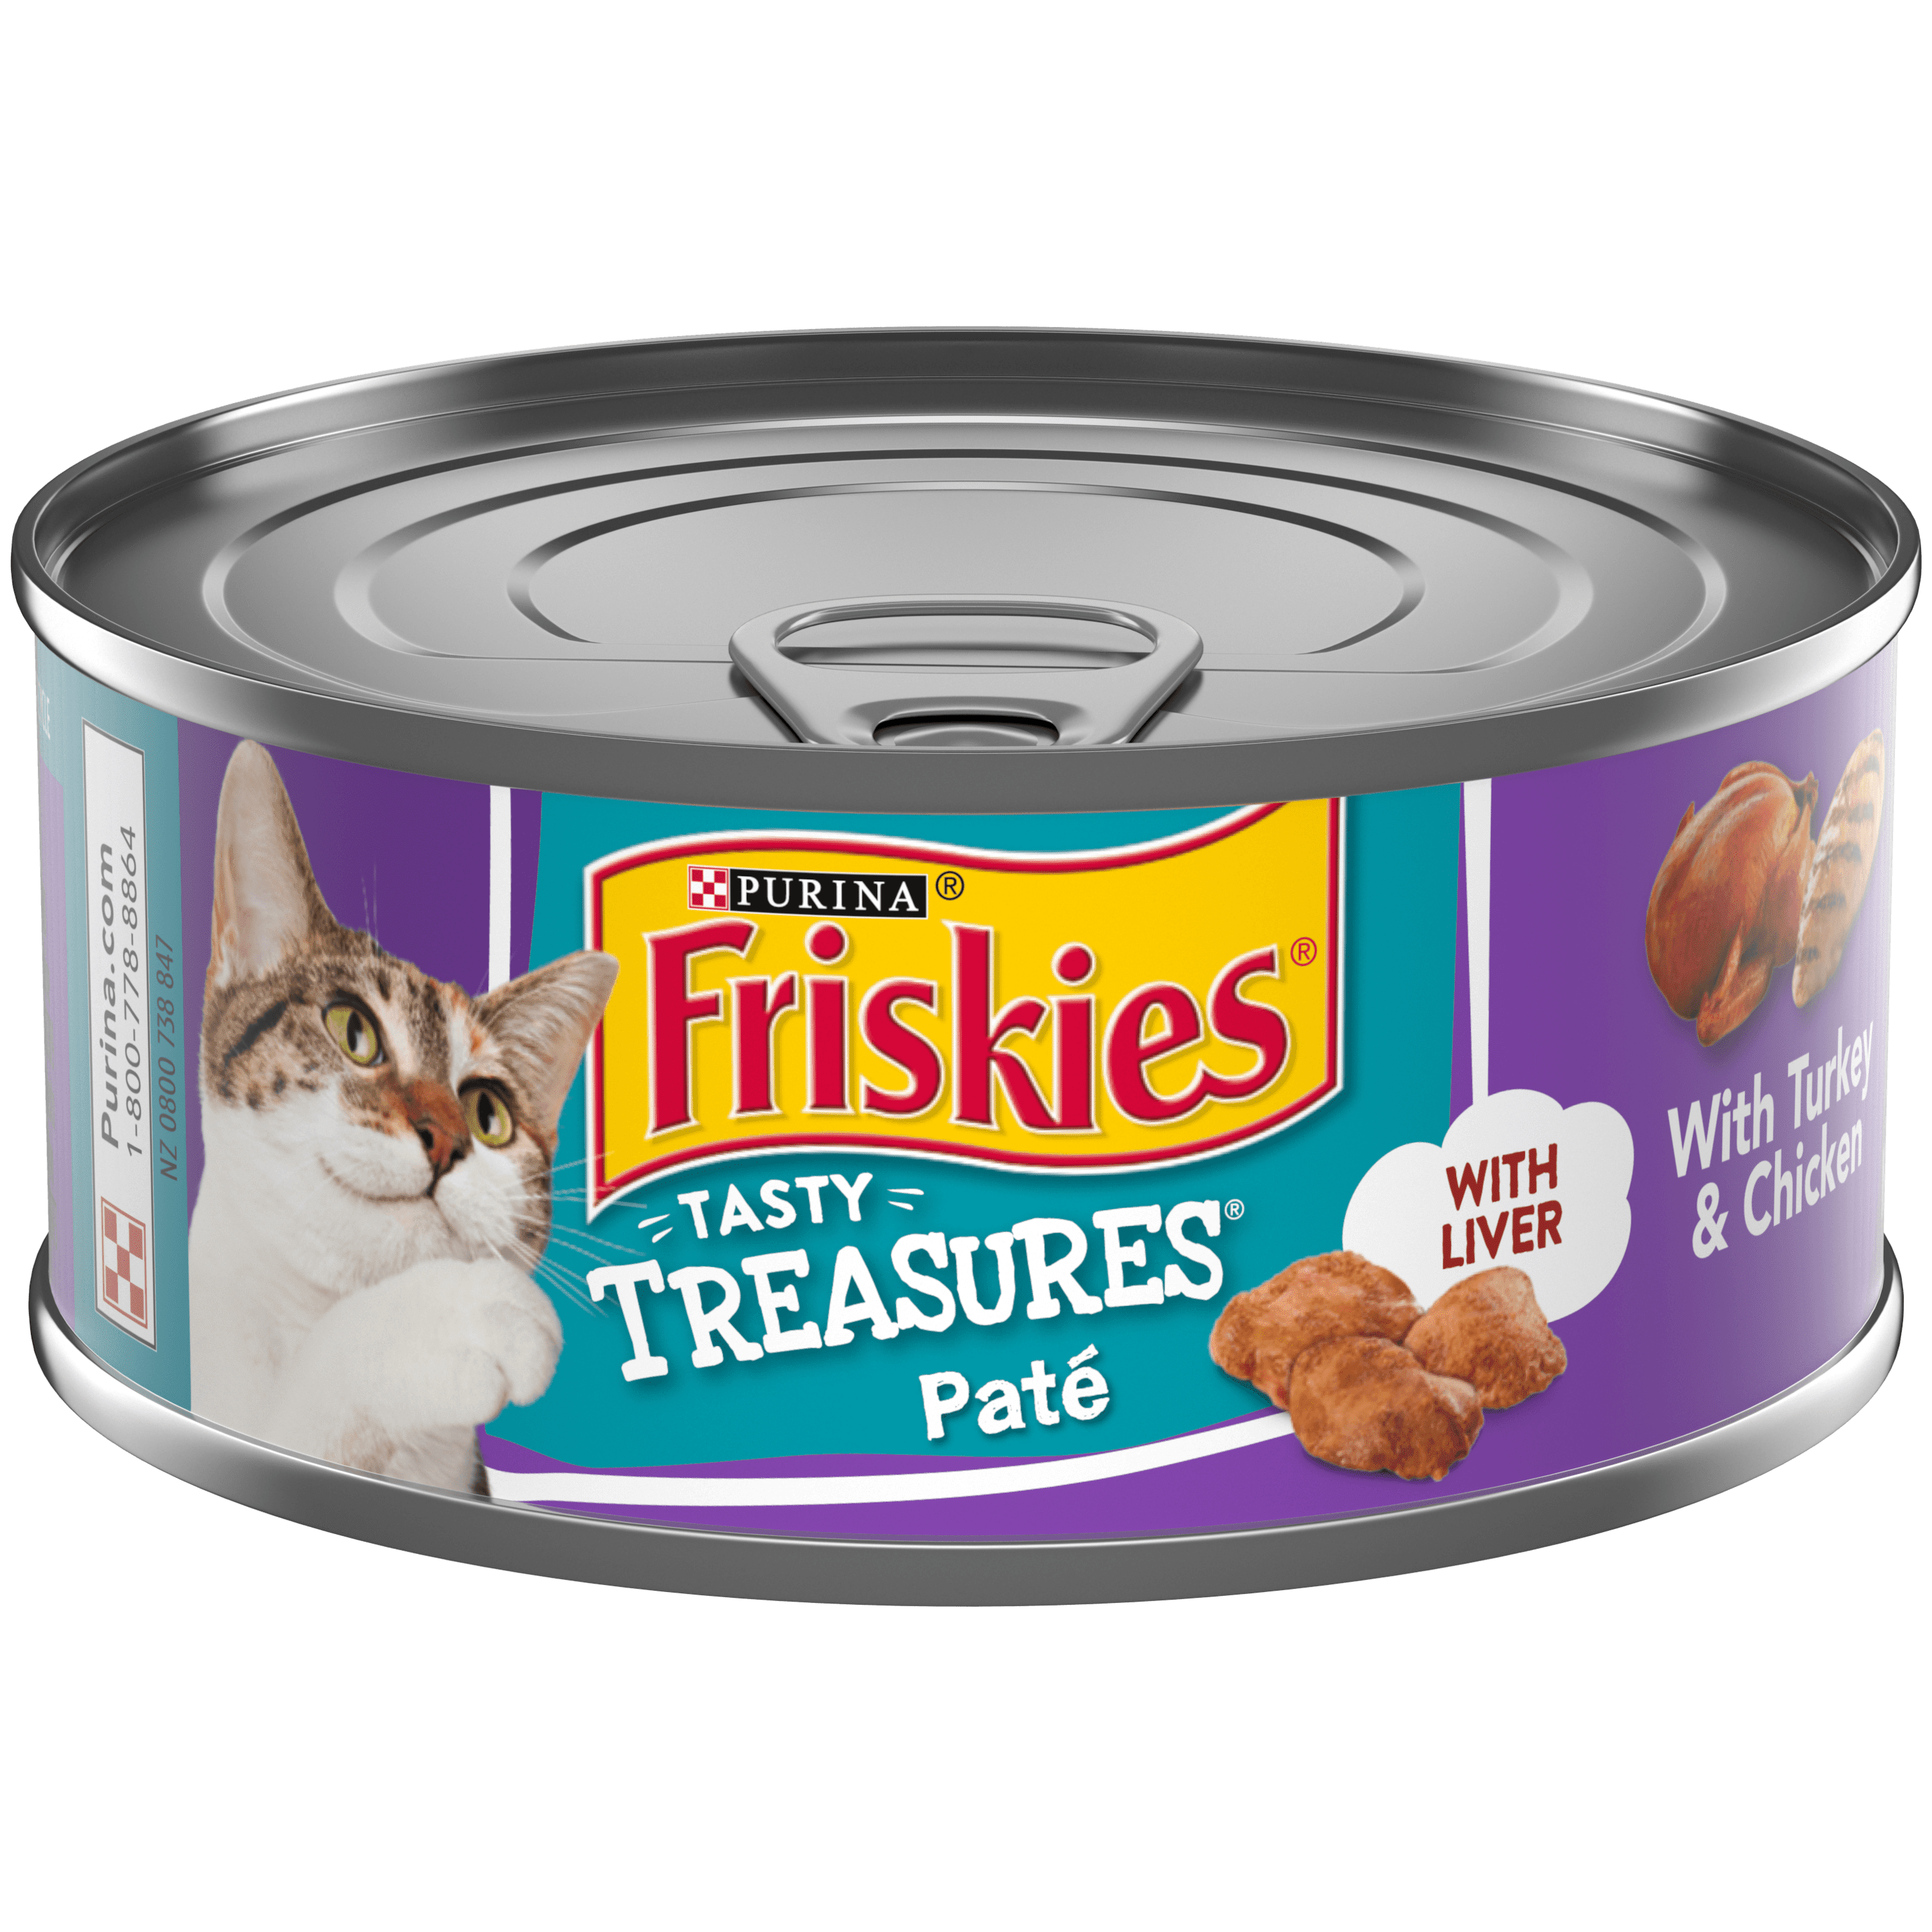 (24 Pack) Friskies Pate Wet Cat Food, Tasty Treasures With Liver